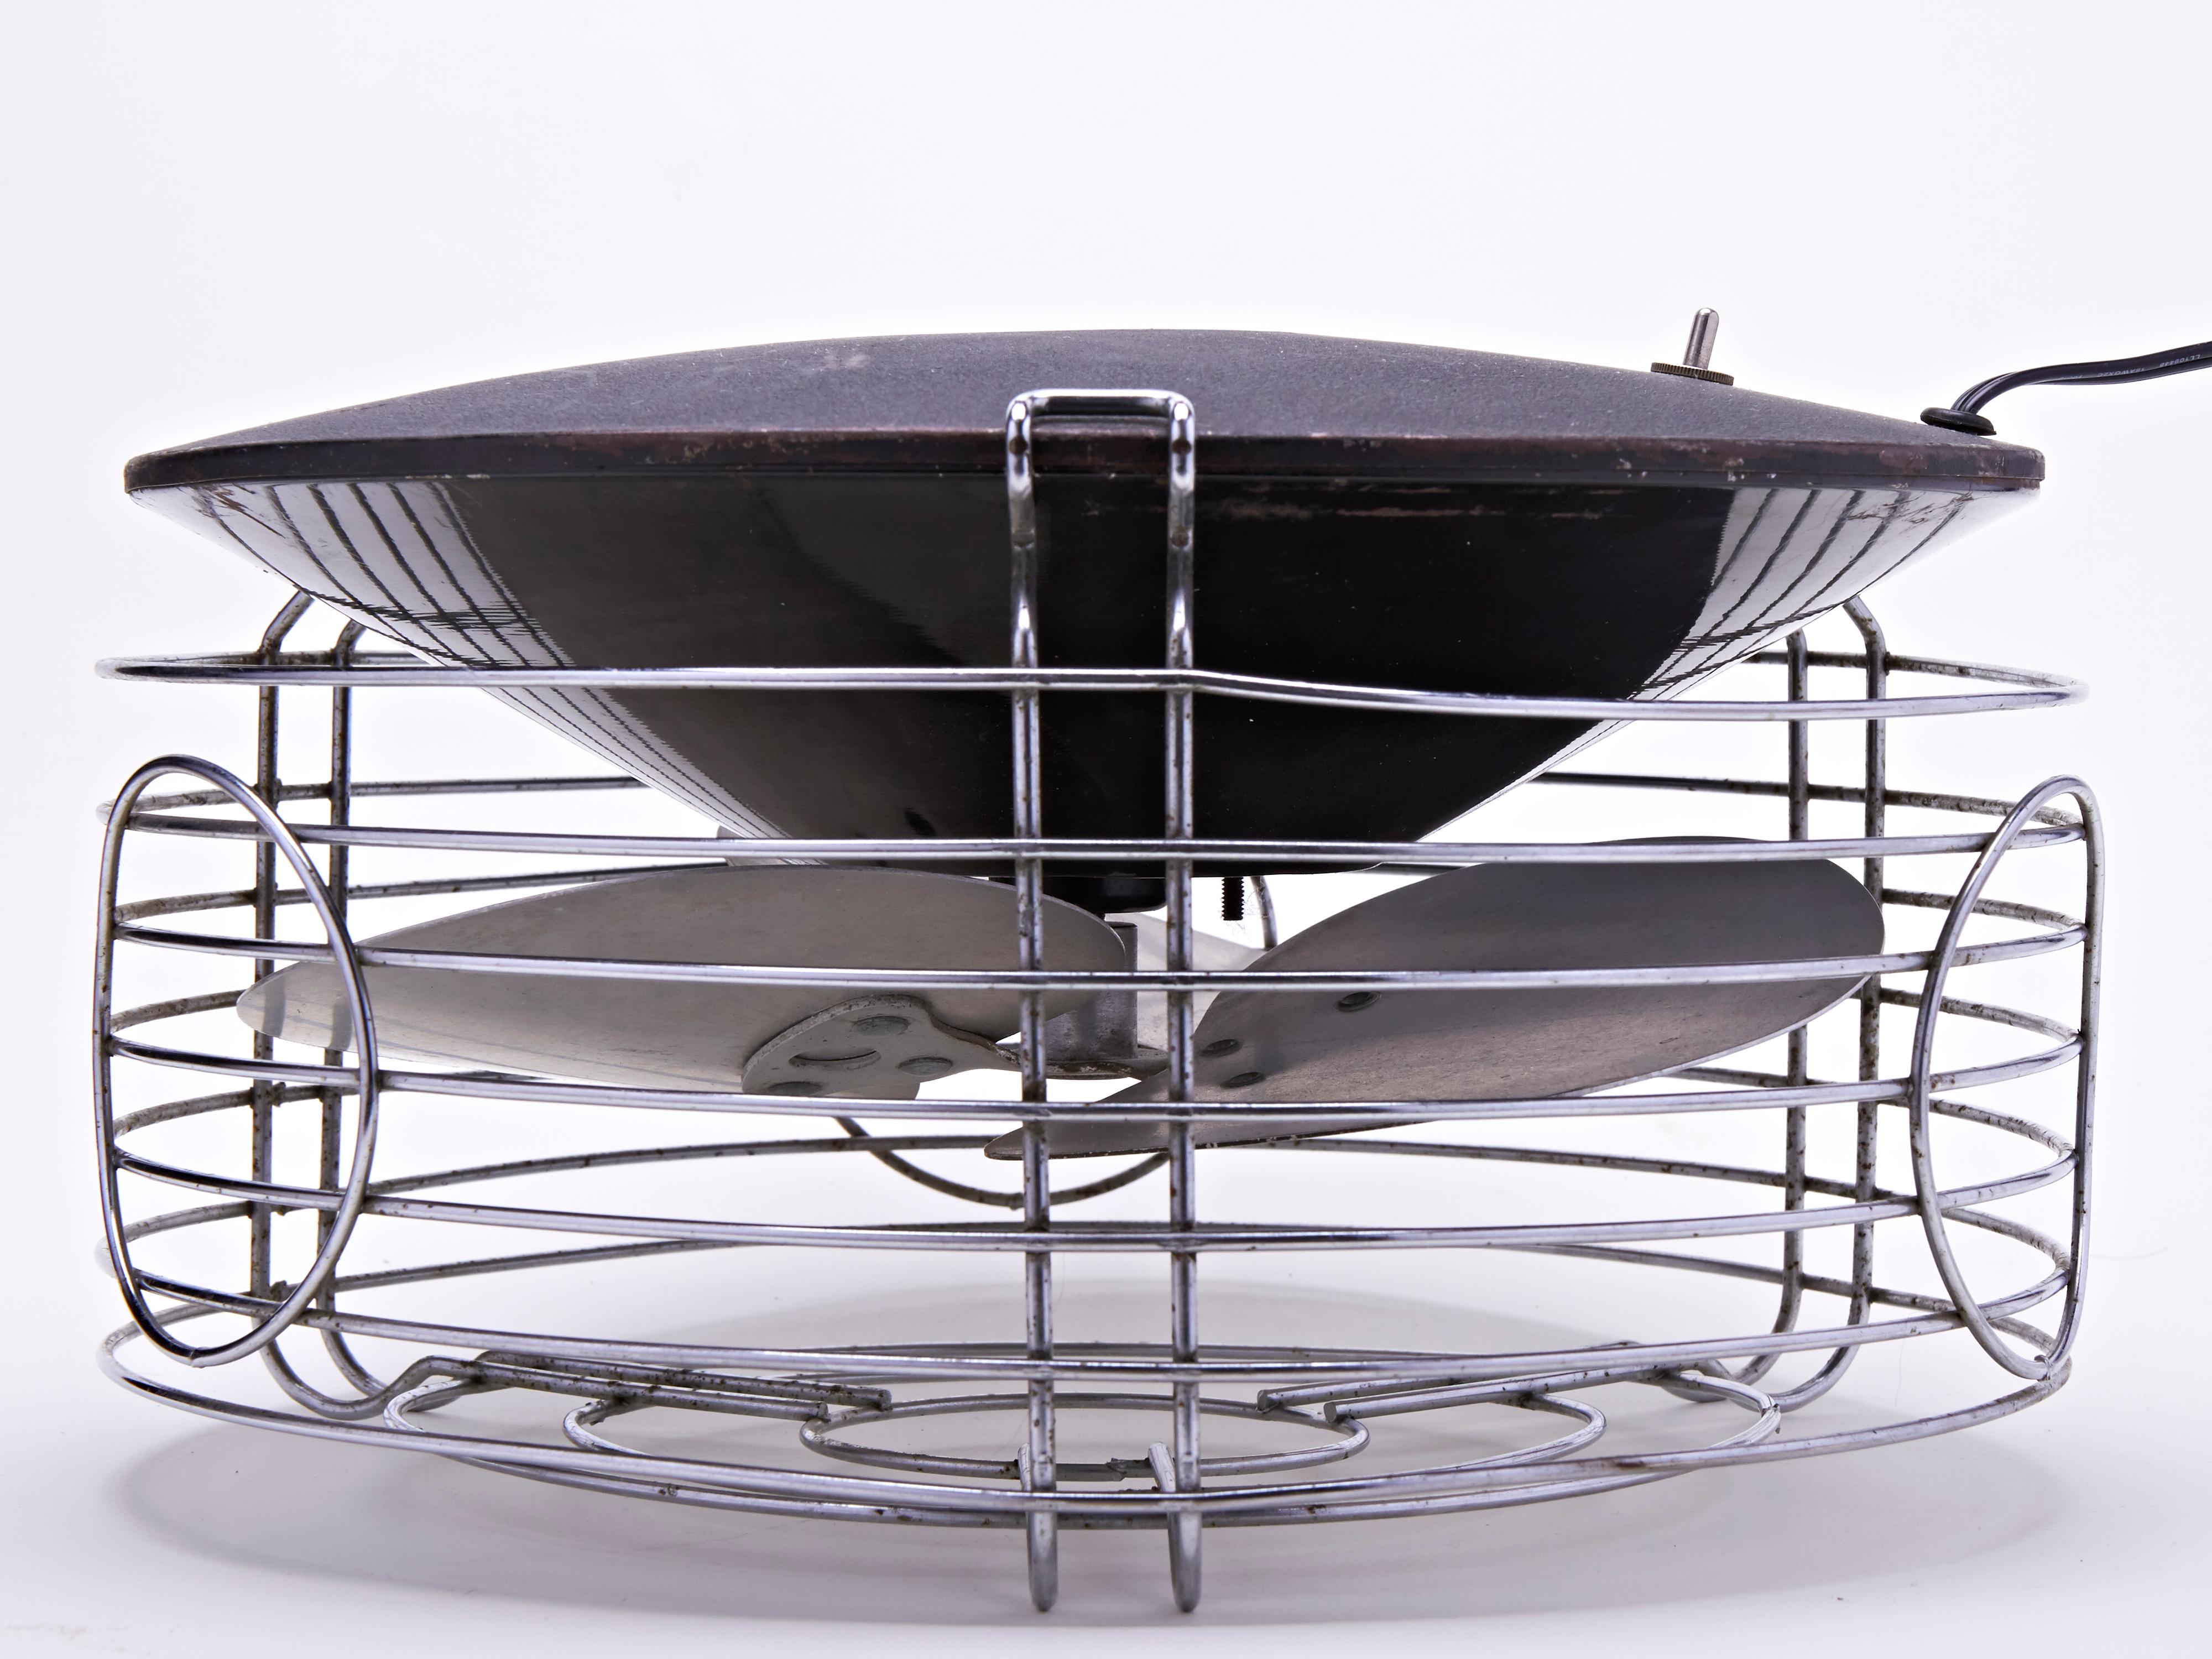 This stunningly designed American Art Deco/Machine Age Command-Air lateral floor fan is sometimes confused with a hassock fan. However this was not designed to sit on or put one's feet on, but created by the Warren Engineering Corporation of Chicago